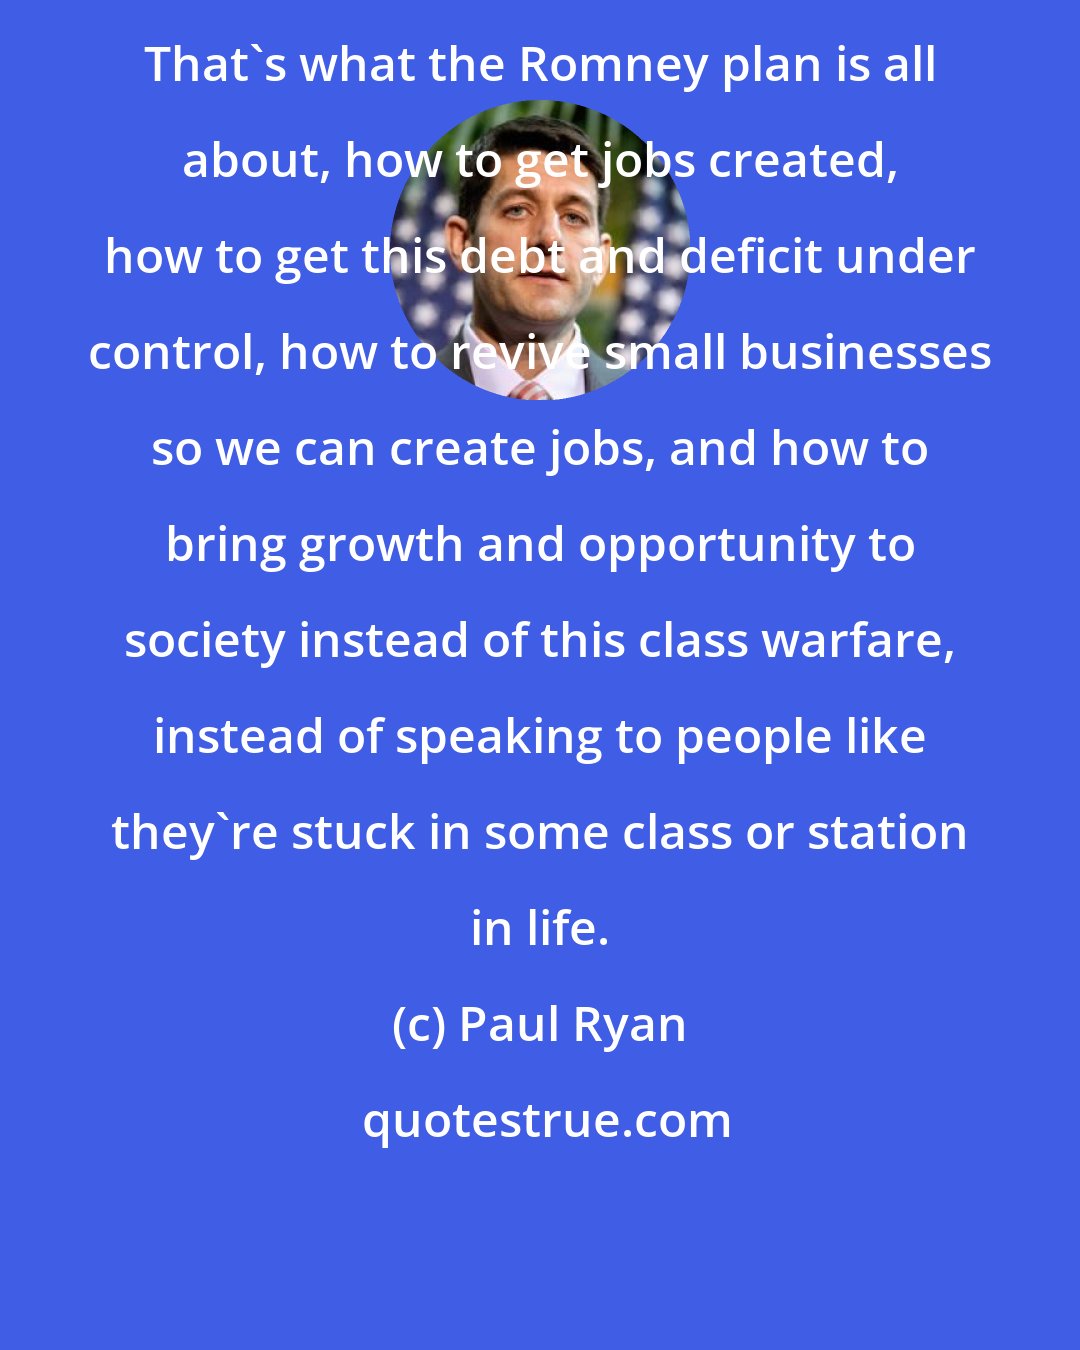 Paul Ryan: That's what the Romney plan is all about, how to get jobs created, how to get this debt and deficit under control, how to revive small businesses so we can create jobs, and how to bring growth and opportunity to society instead of this class warfare, instead of speaking to people like they're stuck in some class or station in life.